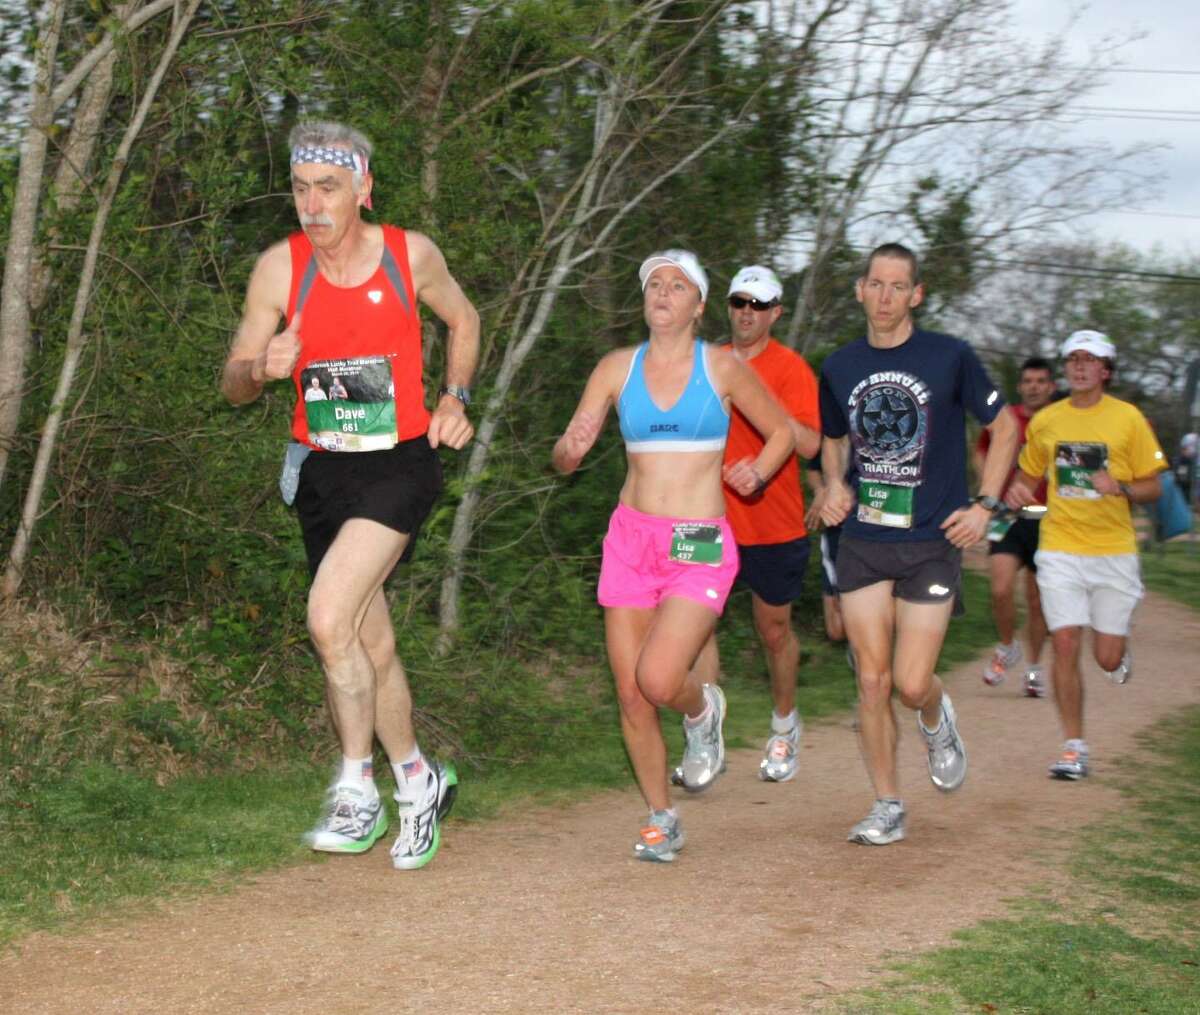 The Seabrook Lucky Trails run will be March 18-20 at Rex Meador Park, 2100 Meyer Road. Events include two 5Ks, a quarter marathon, two half-marathons and a four-person marathon relay. Proceeds benefit The Bridge Over Troubled Waters. The price ranges from $15-$230. seabrookmarathon.org